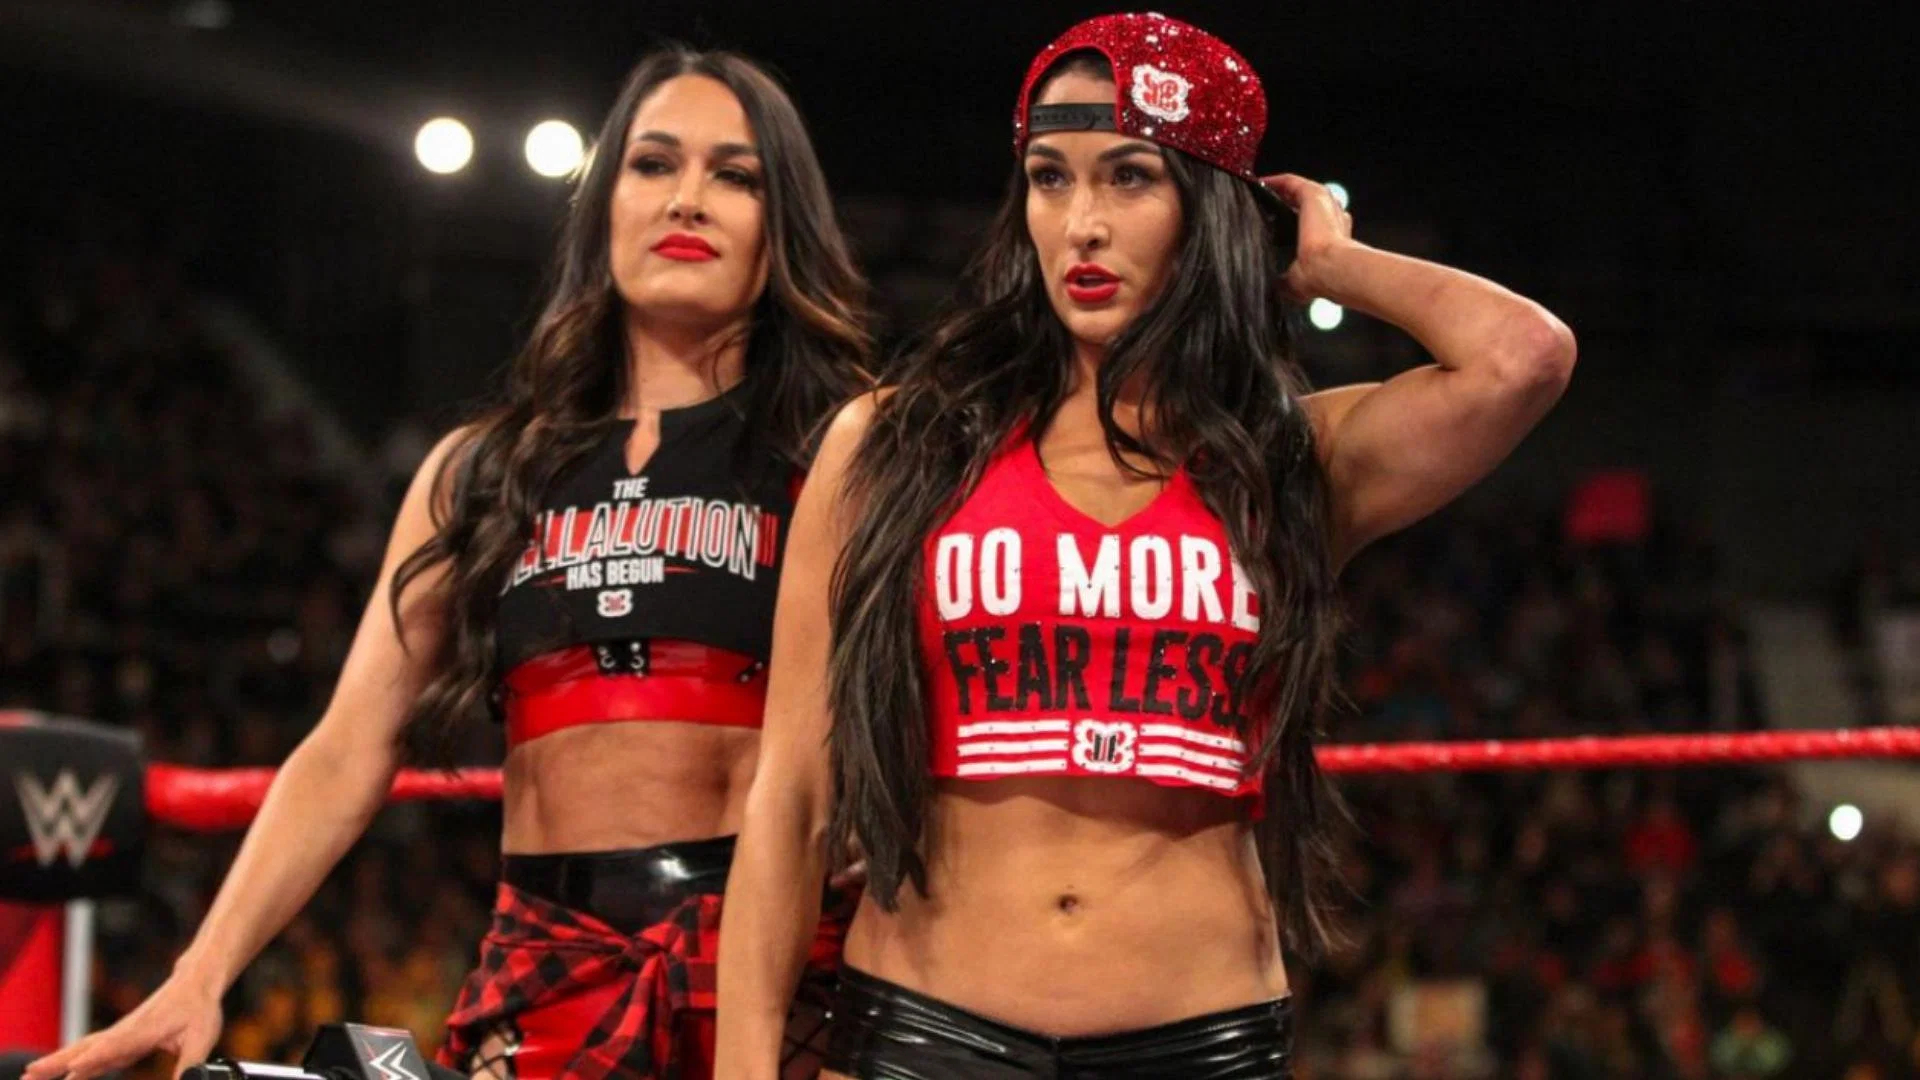 1920x1080 The Bella Twins comment on their time in WWE